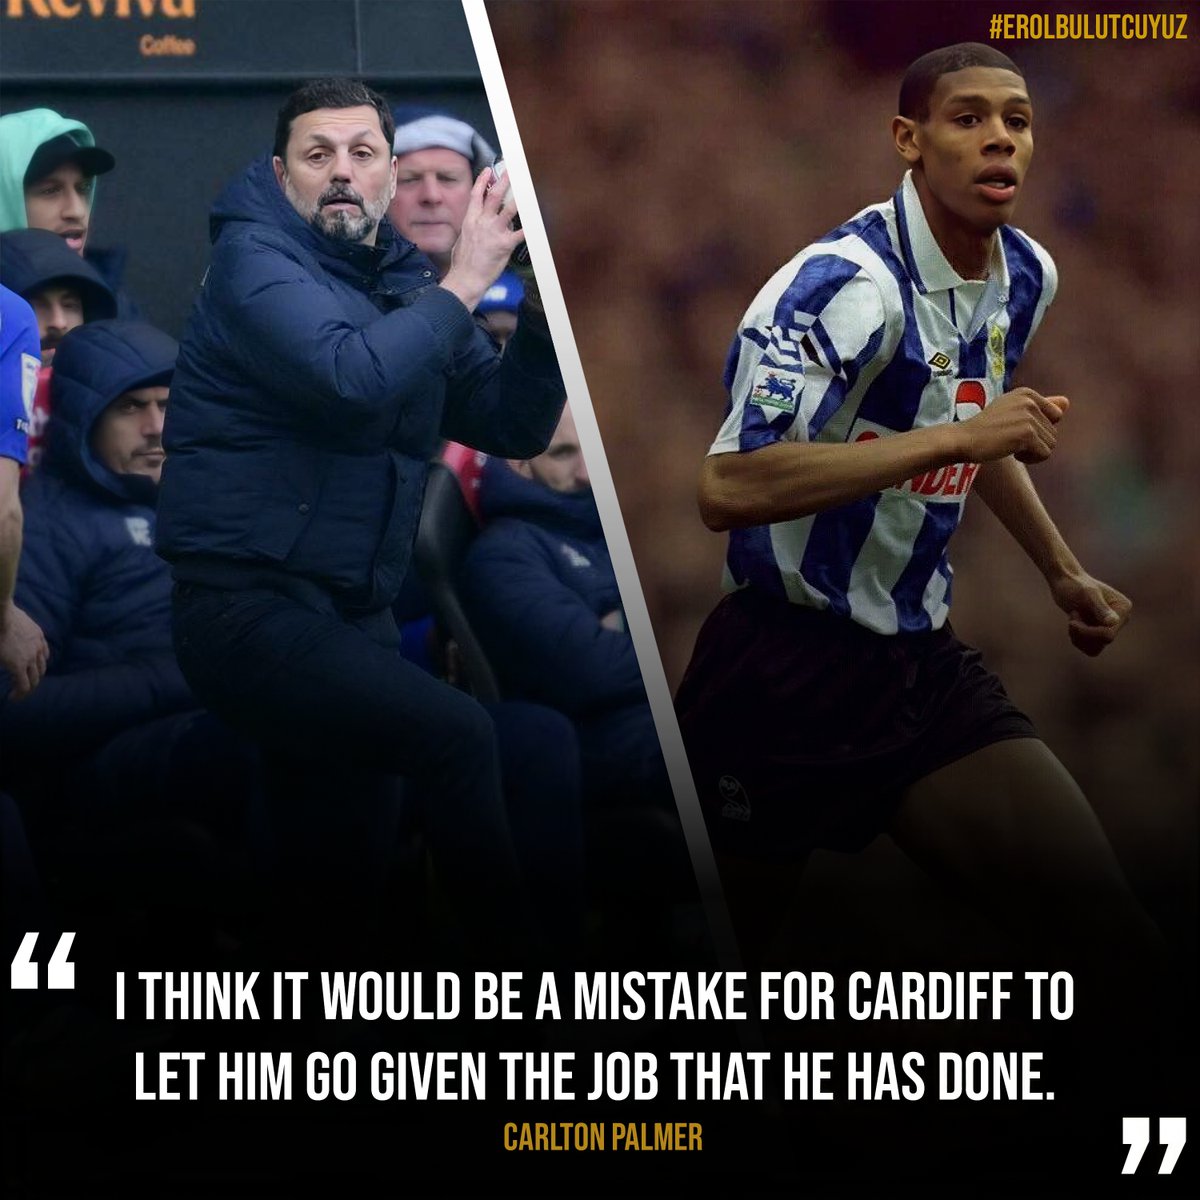 Allowing Erol Bulut to leave at the end of his contract would be a 'mistake', according to former England international Carlton Palmer. Carlton Palmer said: “I would think that Cardiff would wait until the end of the season and the manager and the club will sit down and see